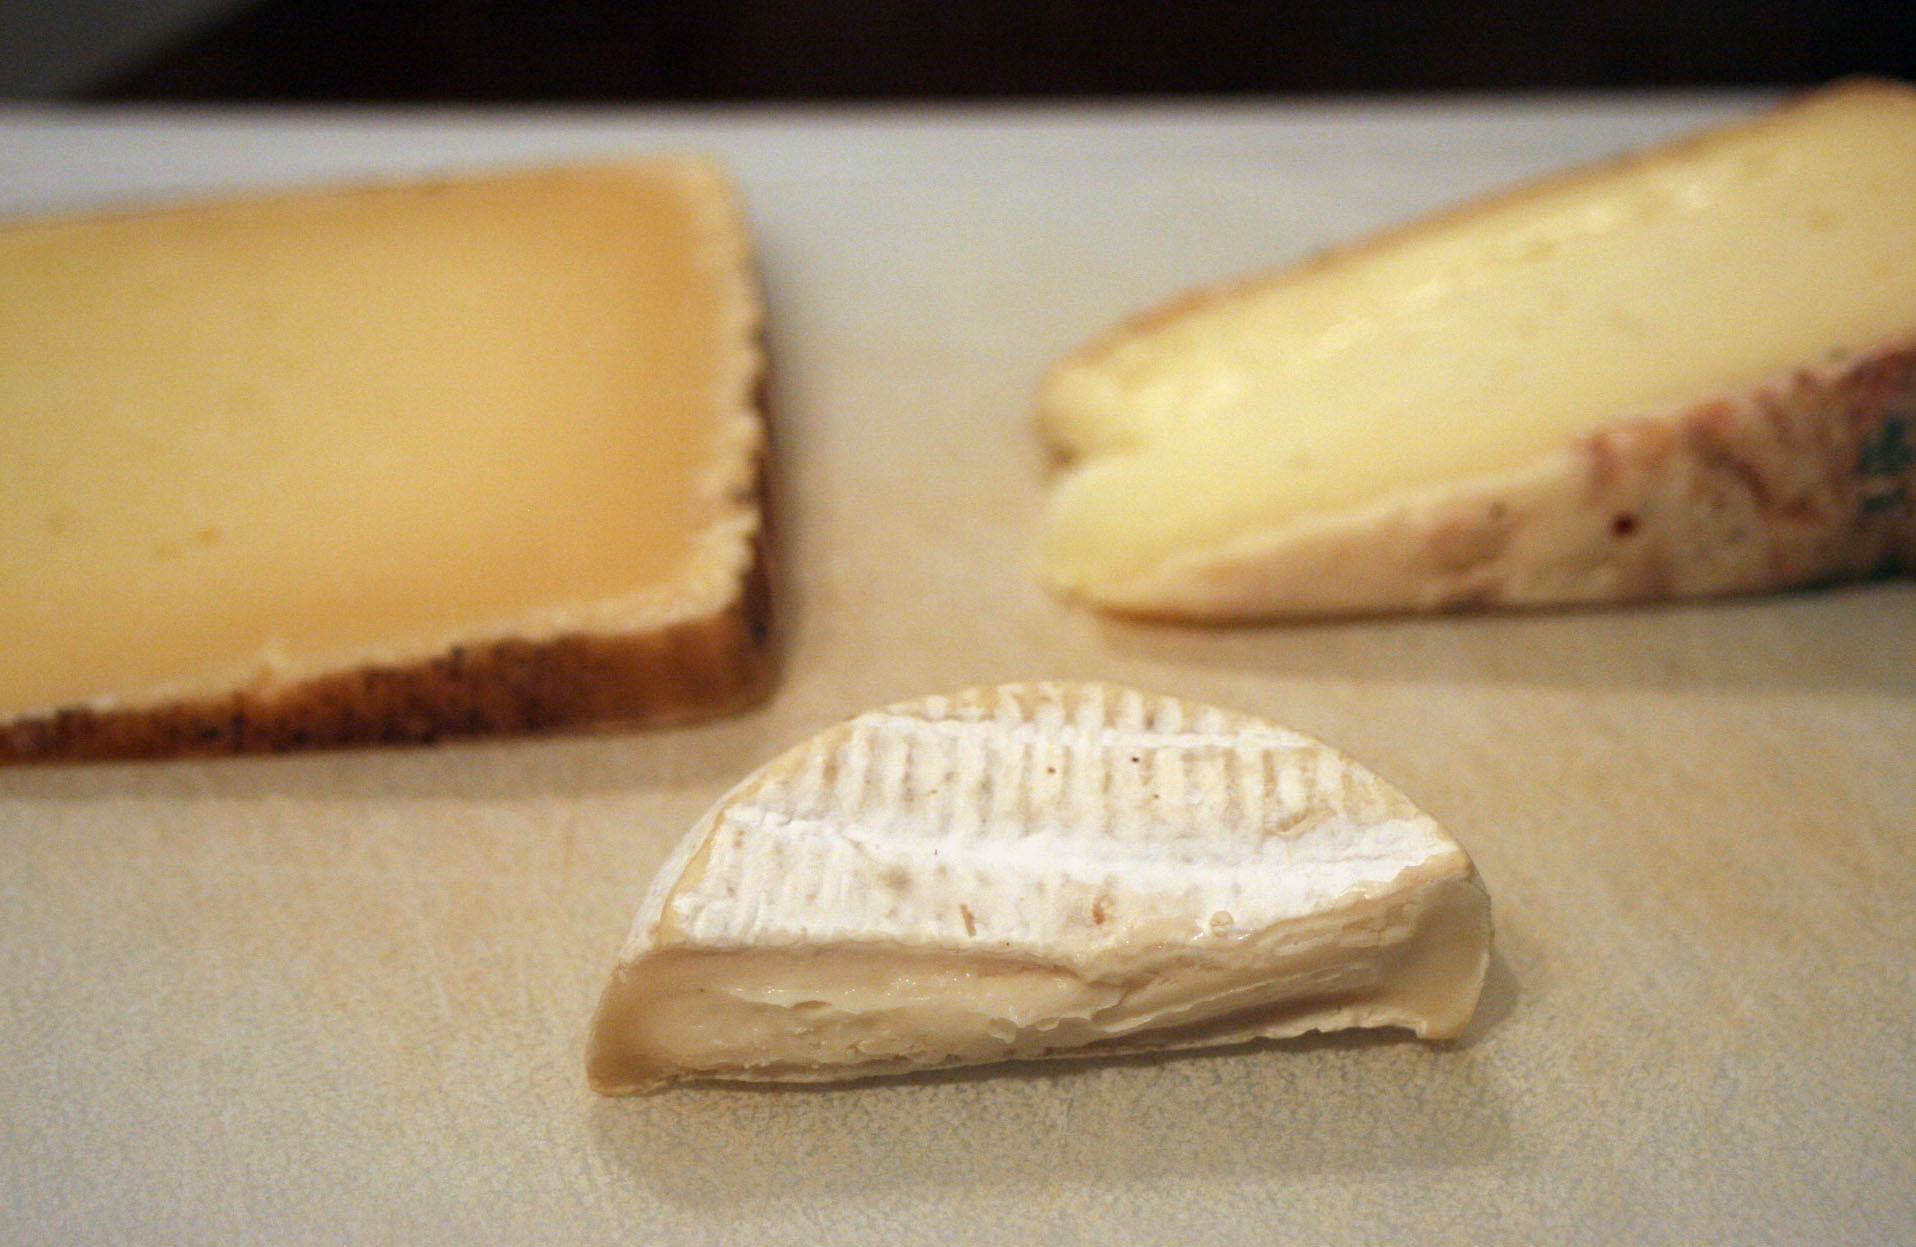 several slices of cheese are on a white surface